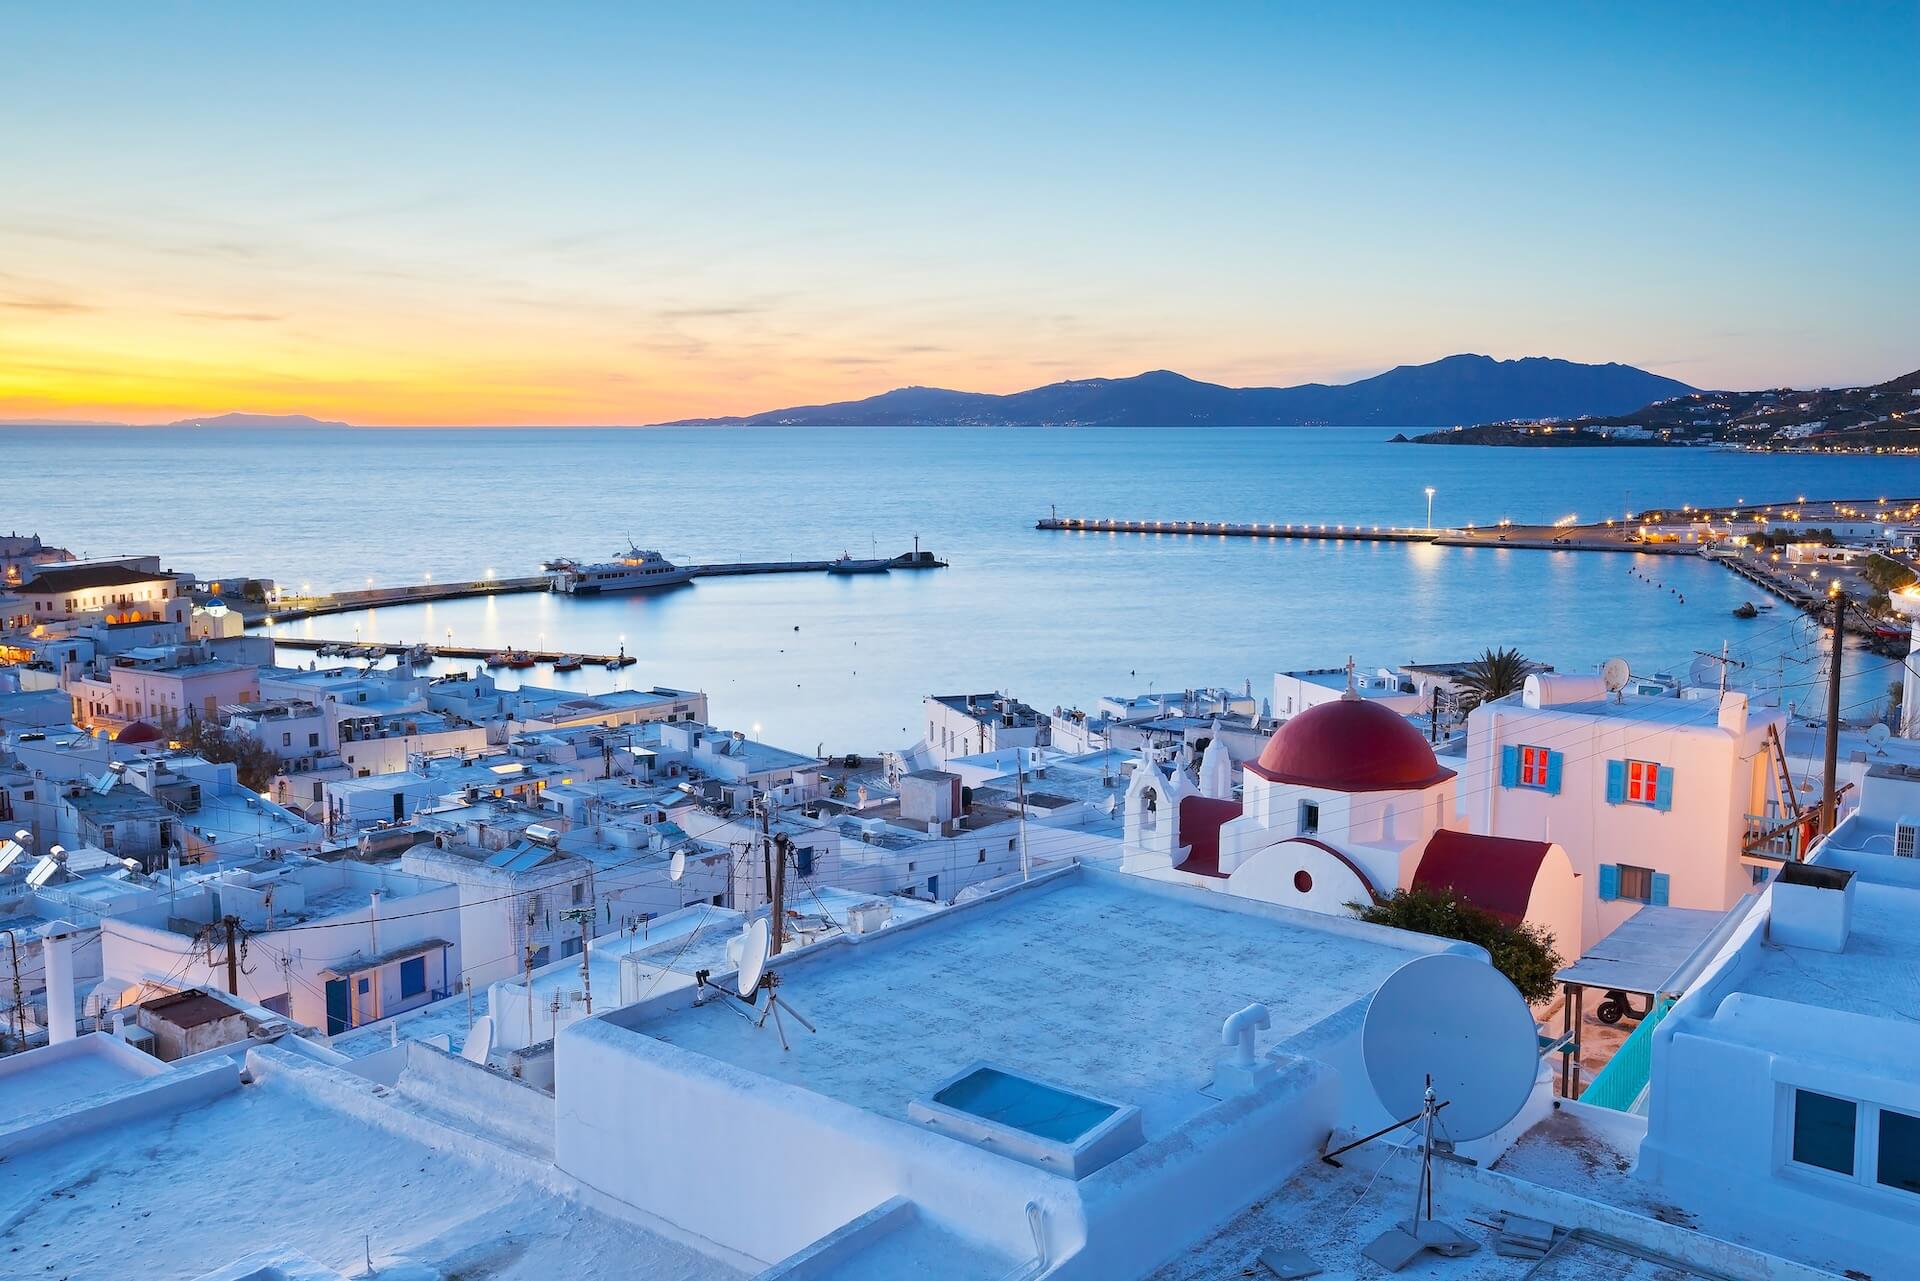 The view of the port and town in Mykonos at twilight